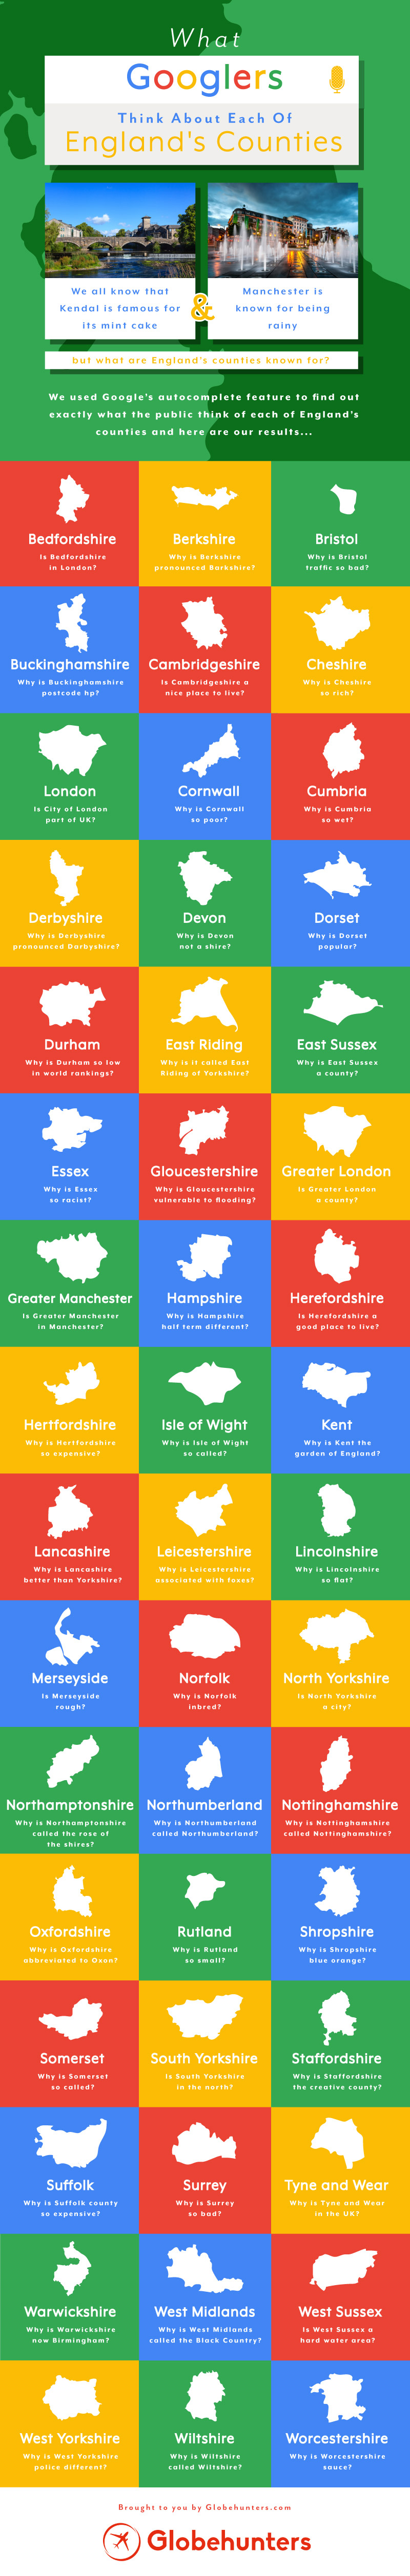 What Googlers Think About Each Of The UK’s Counties